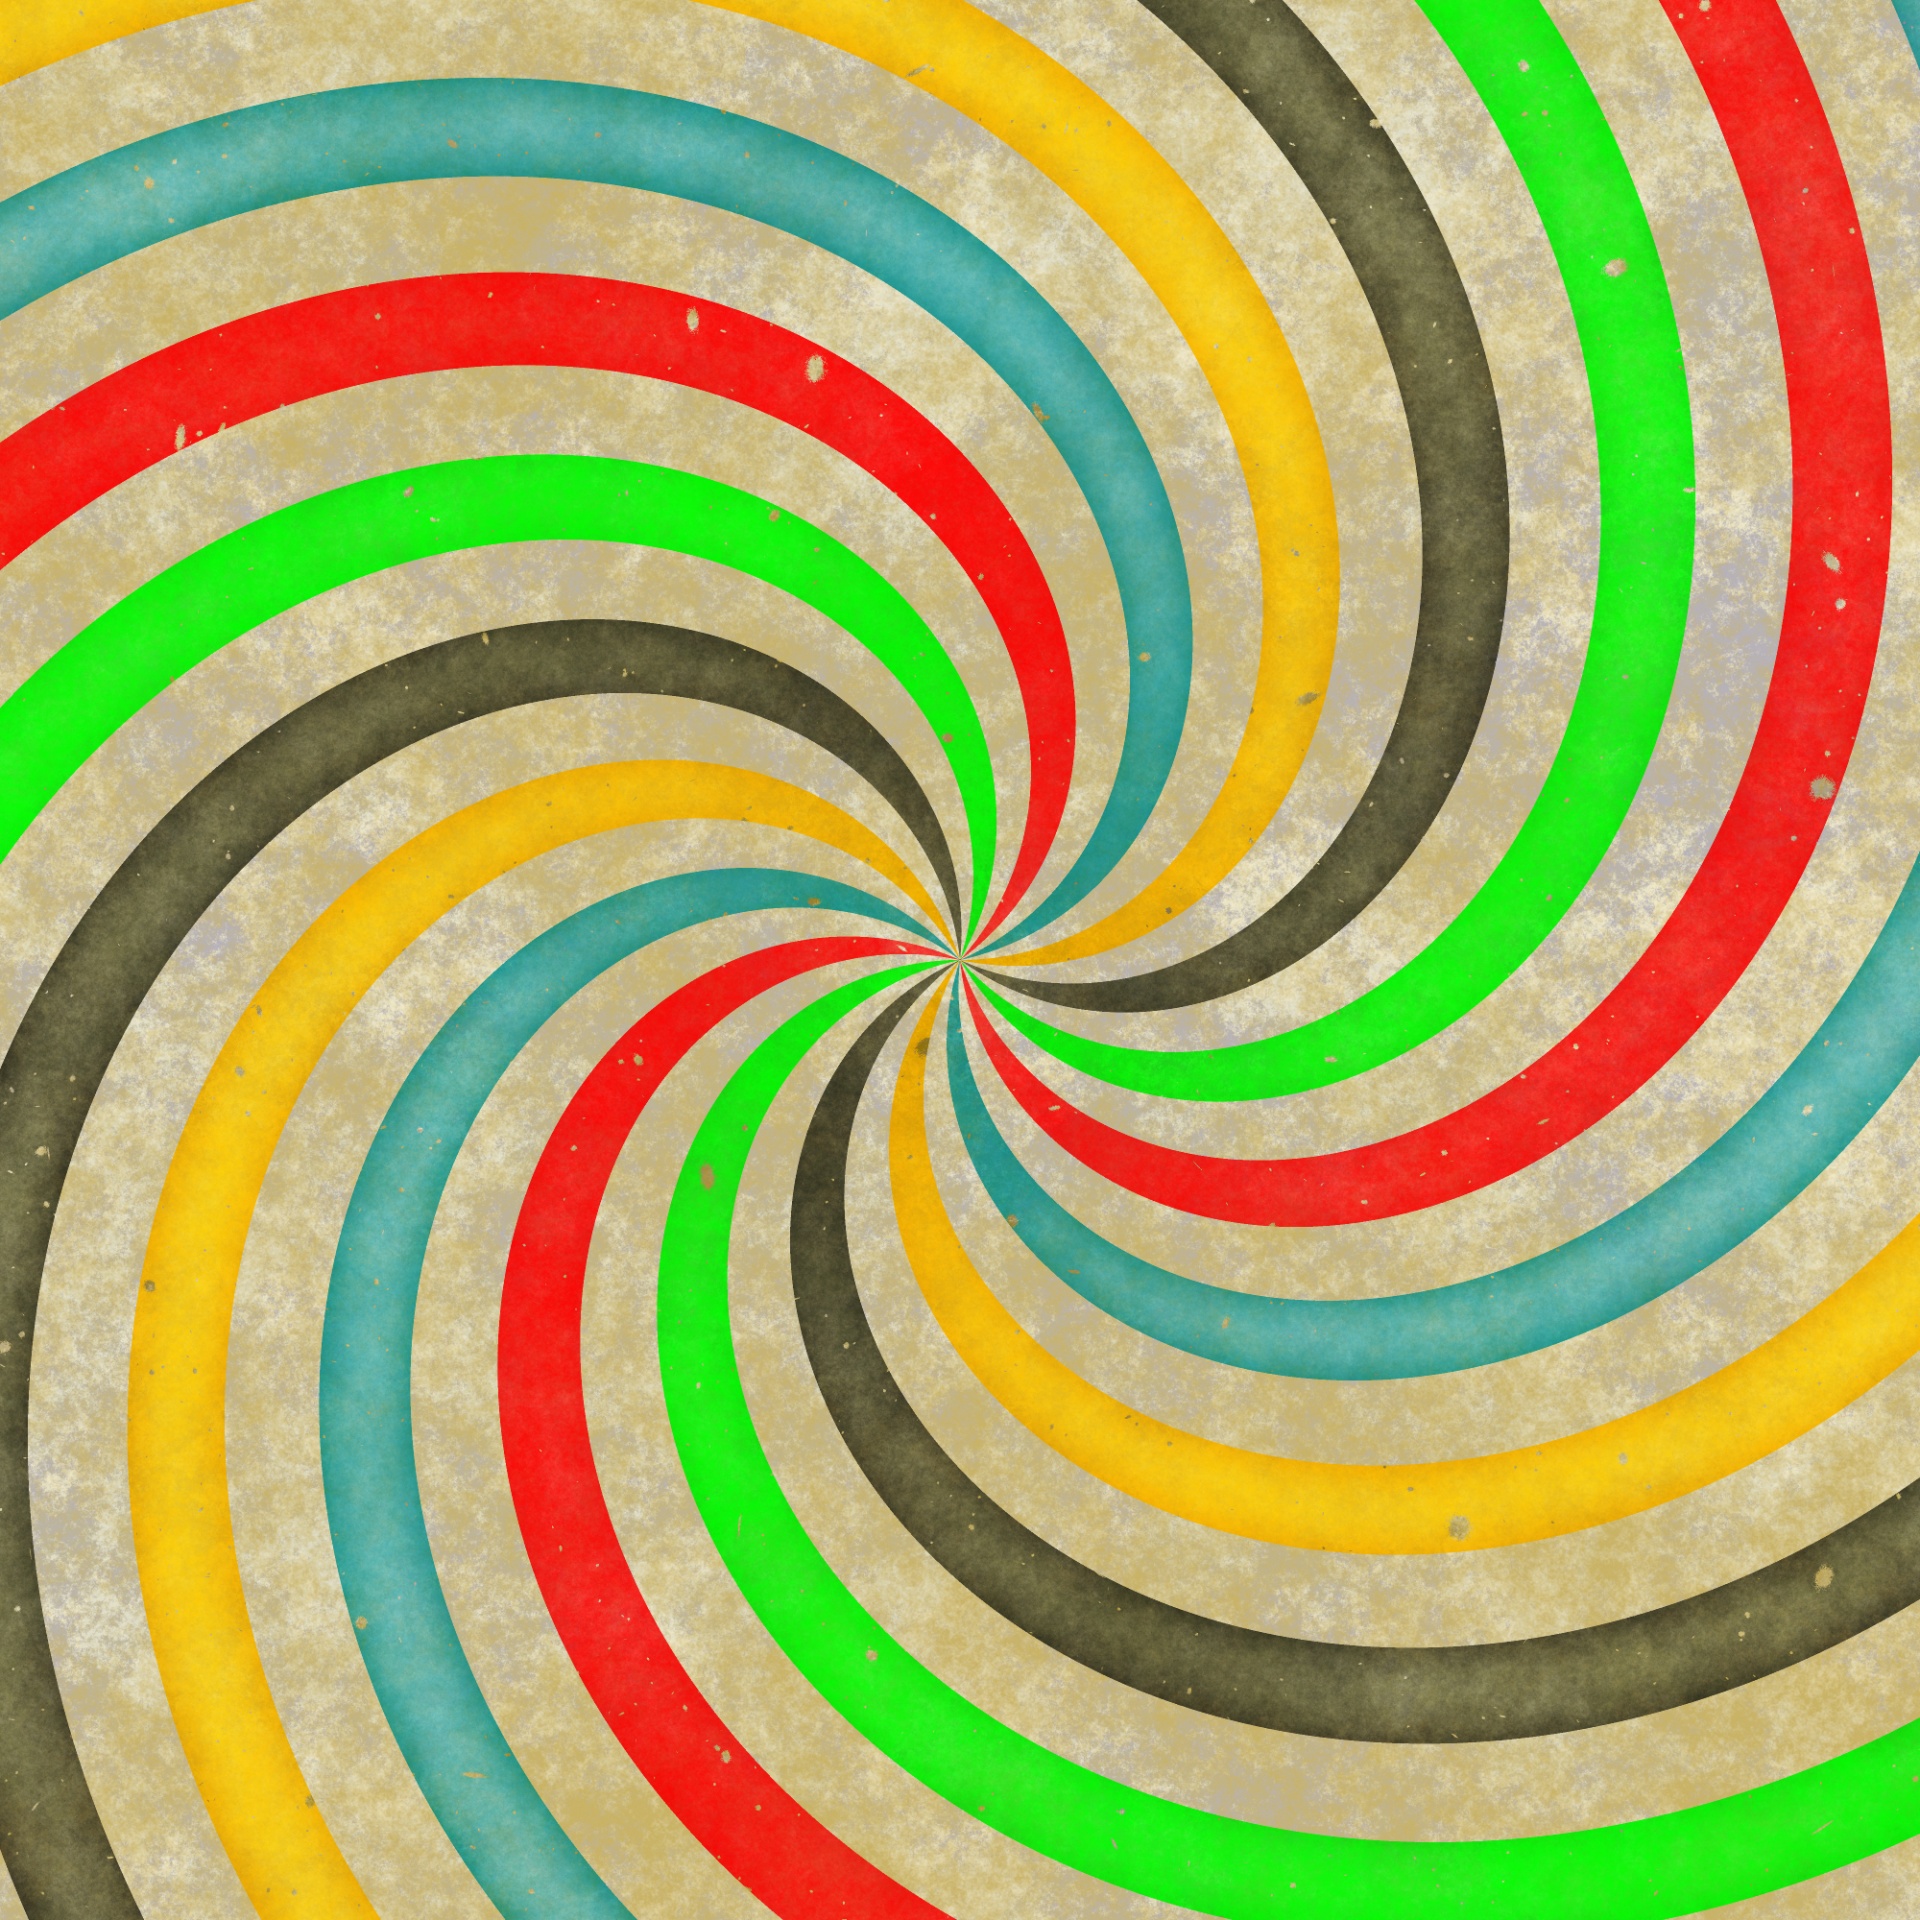 sixties swirl in red, green, blue, and gold